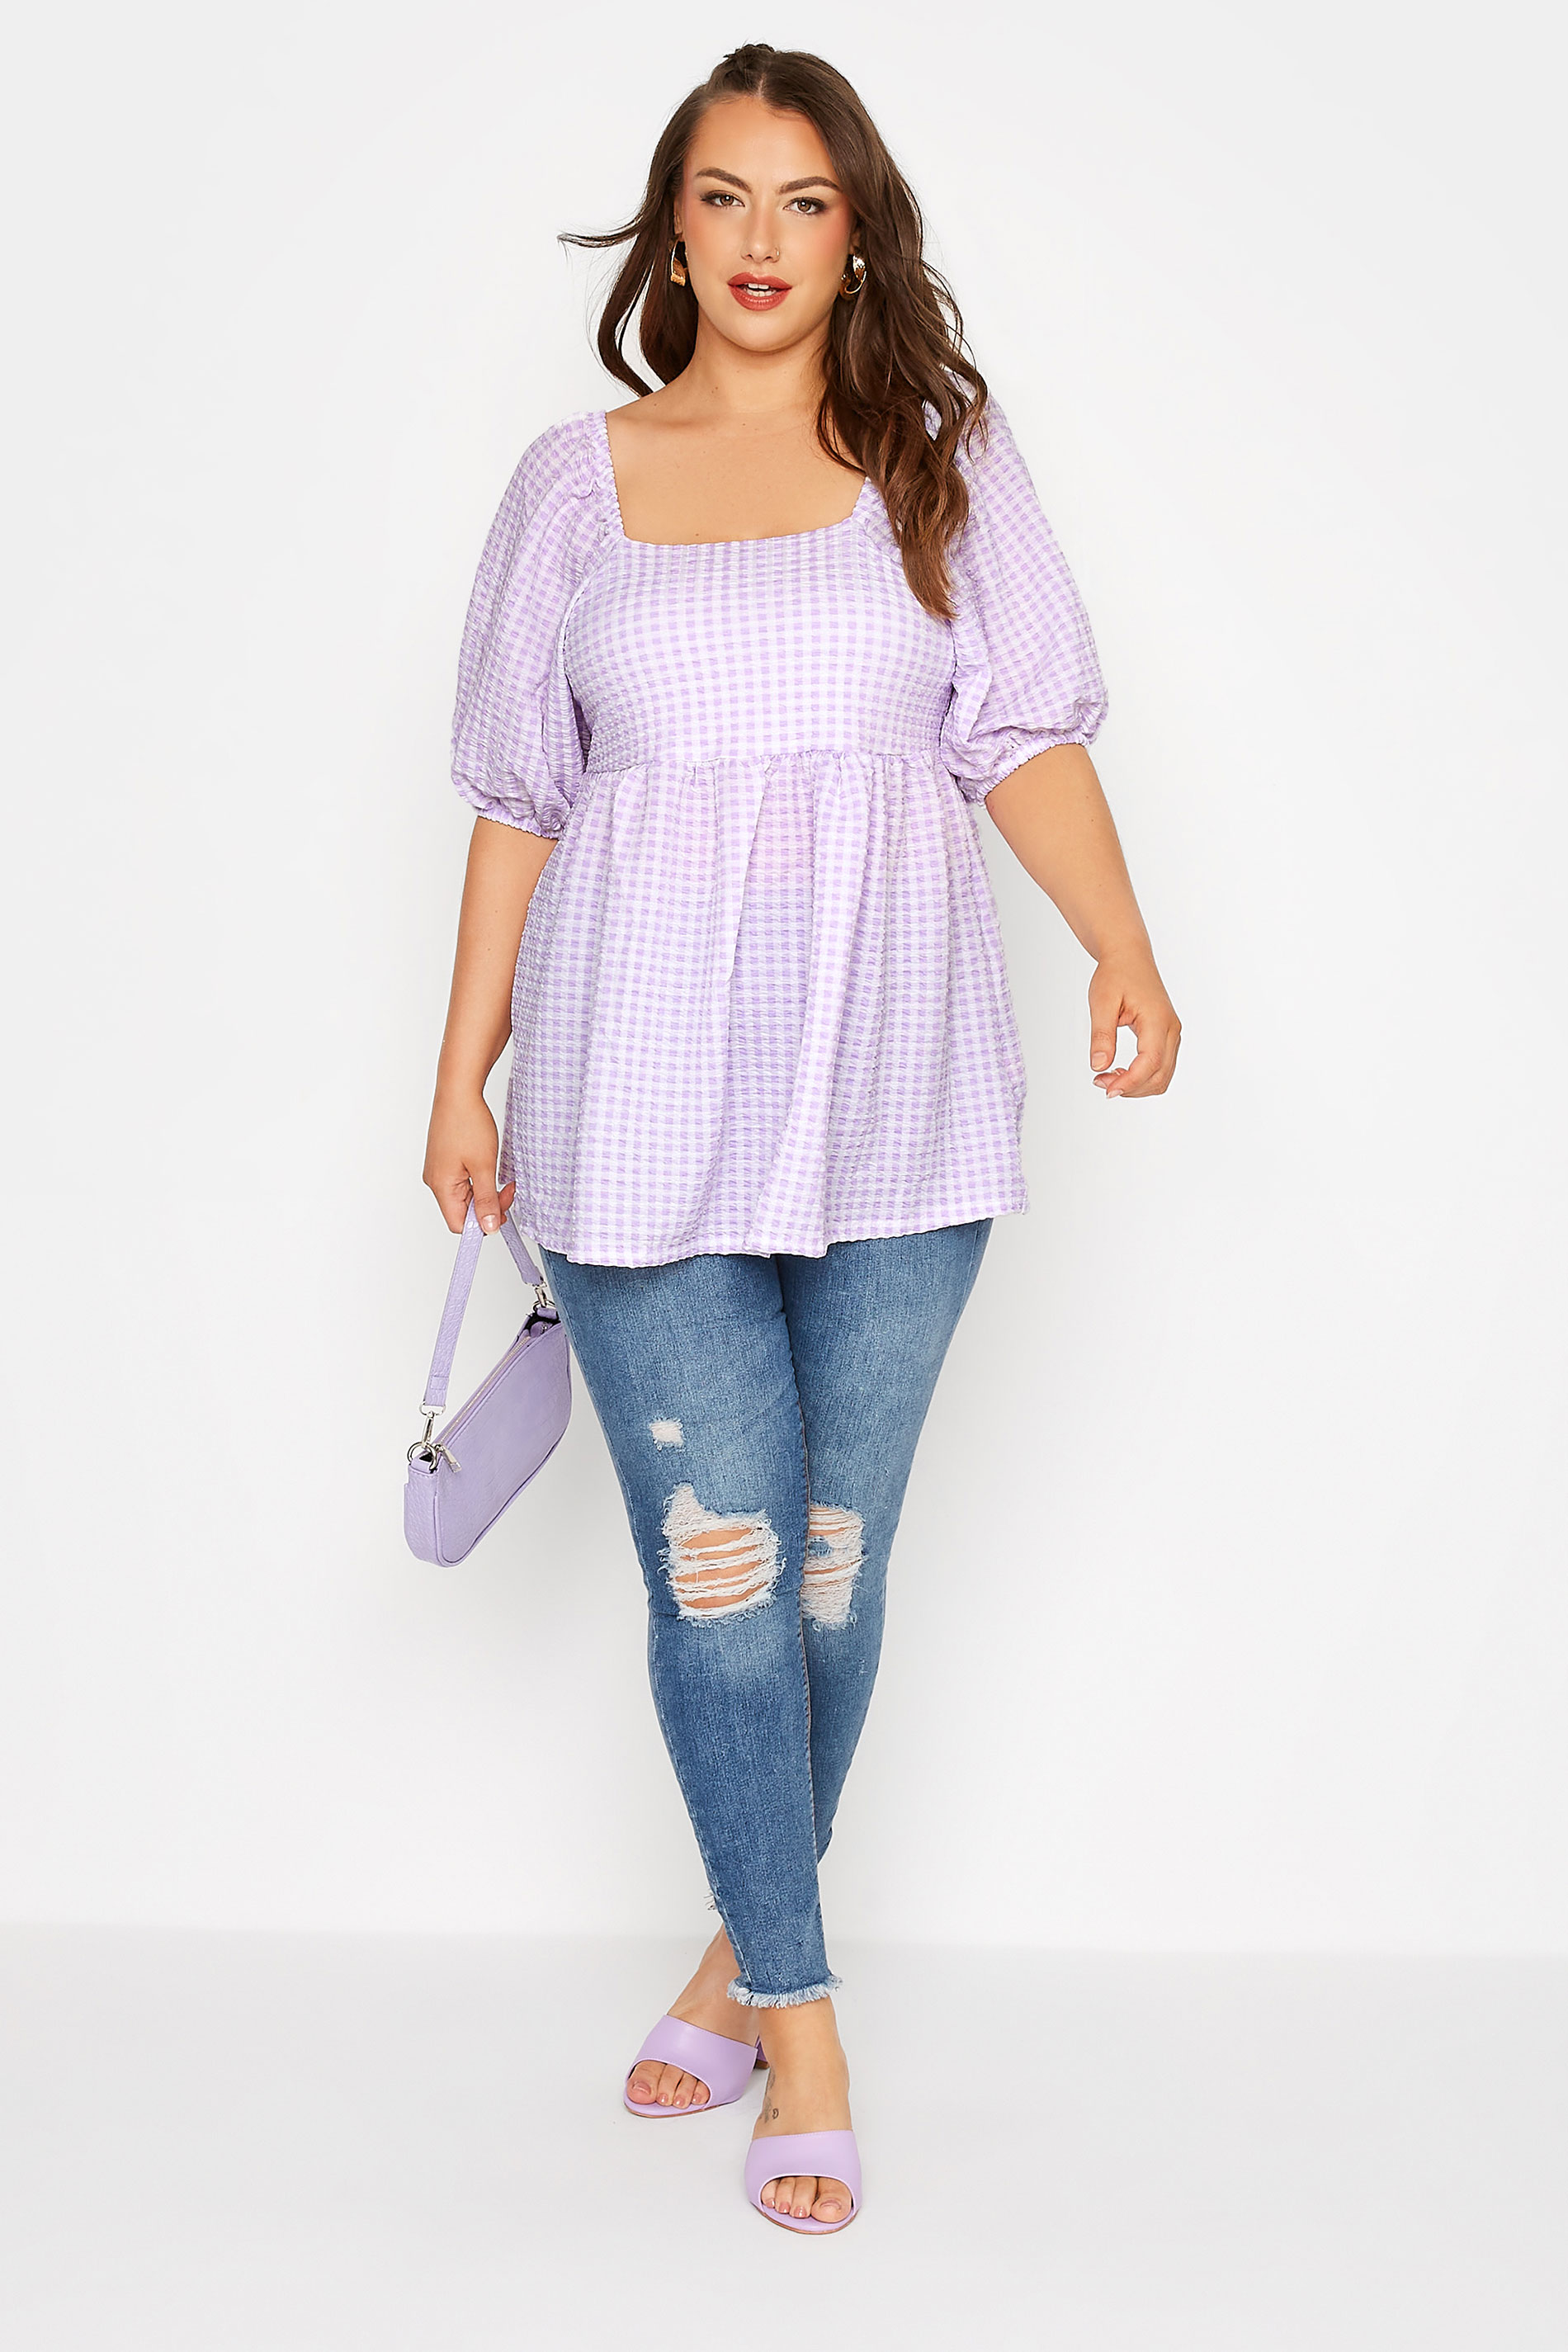 Grande taille  Tops Grande taille  Tops Casual | LIMITED COLLECTION - Top Couleur Lavande à Carreaux Manches Bouffantes - EE14286